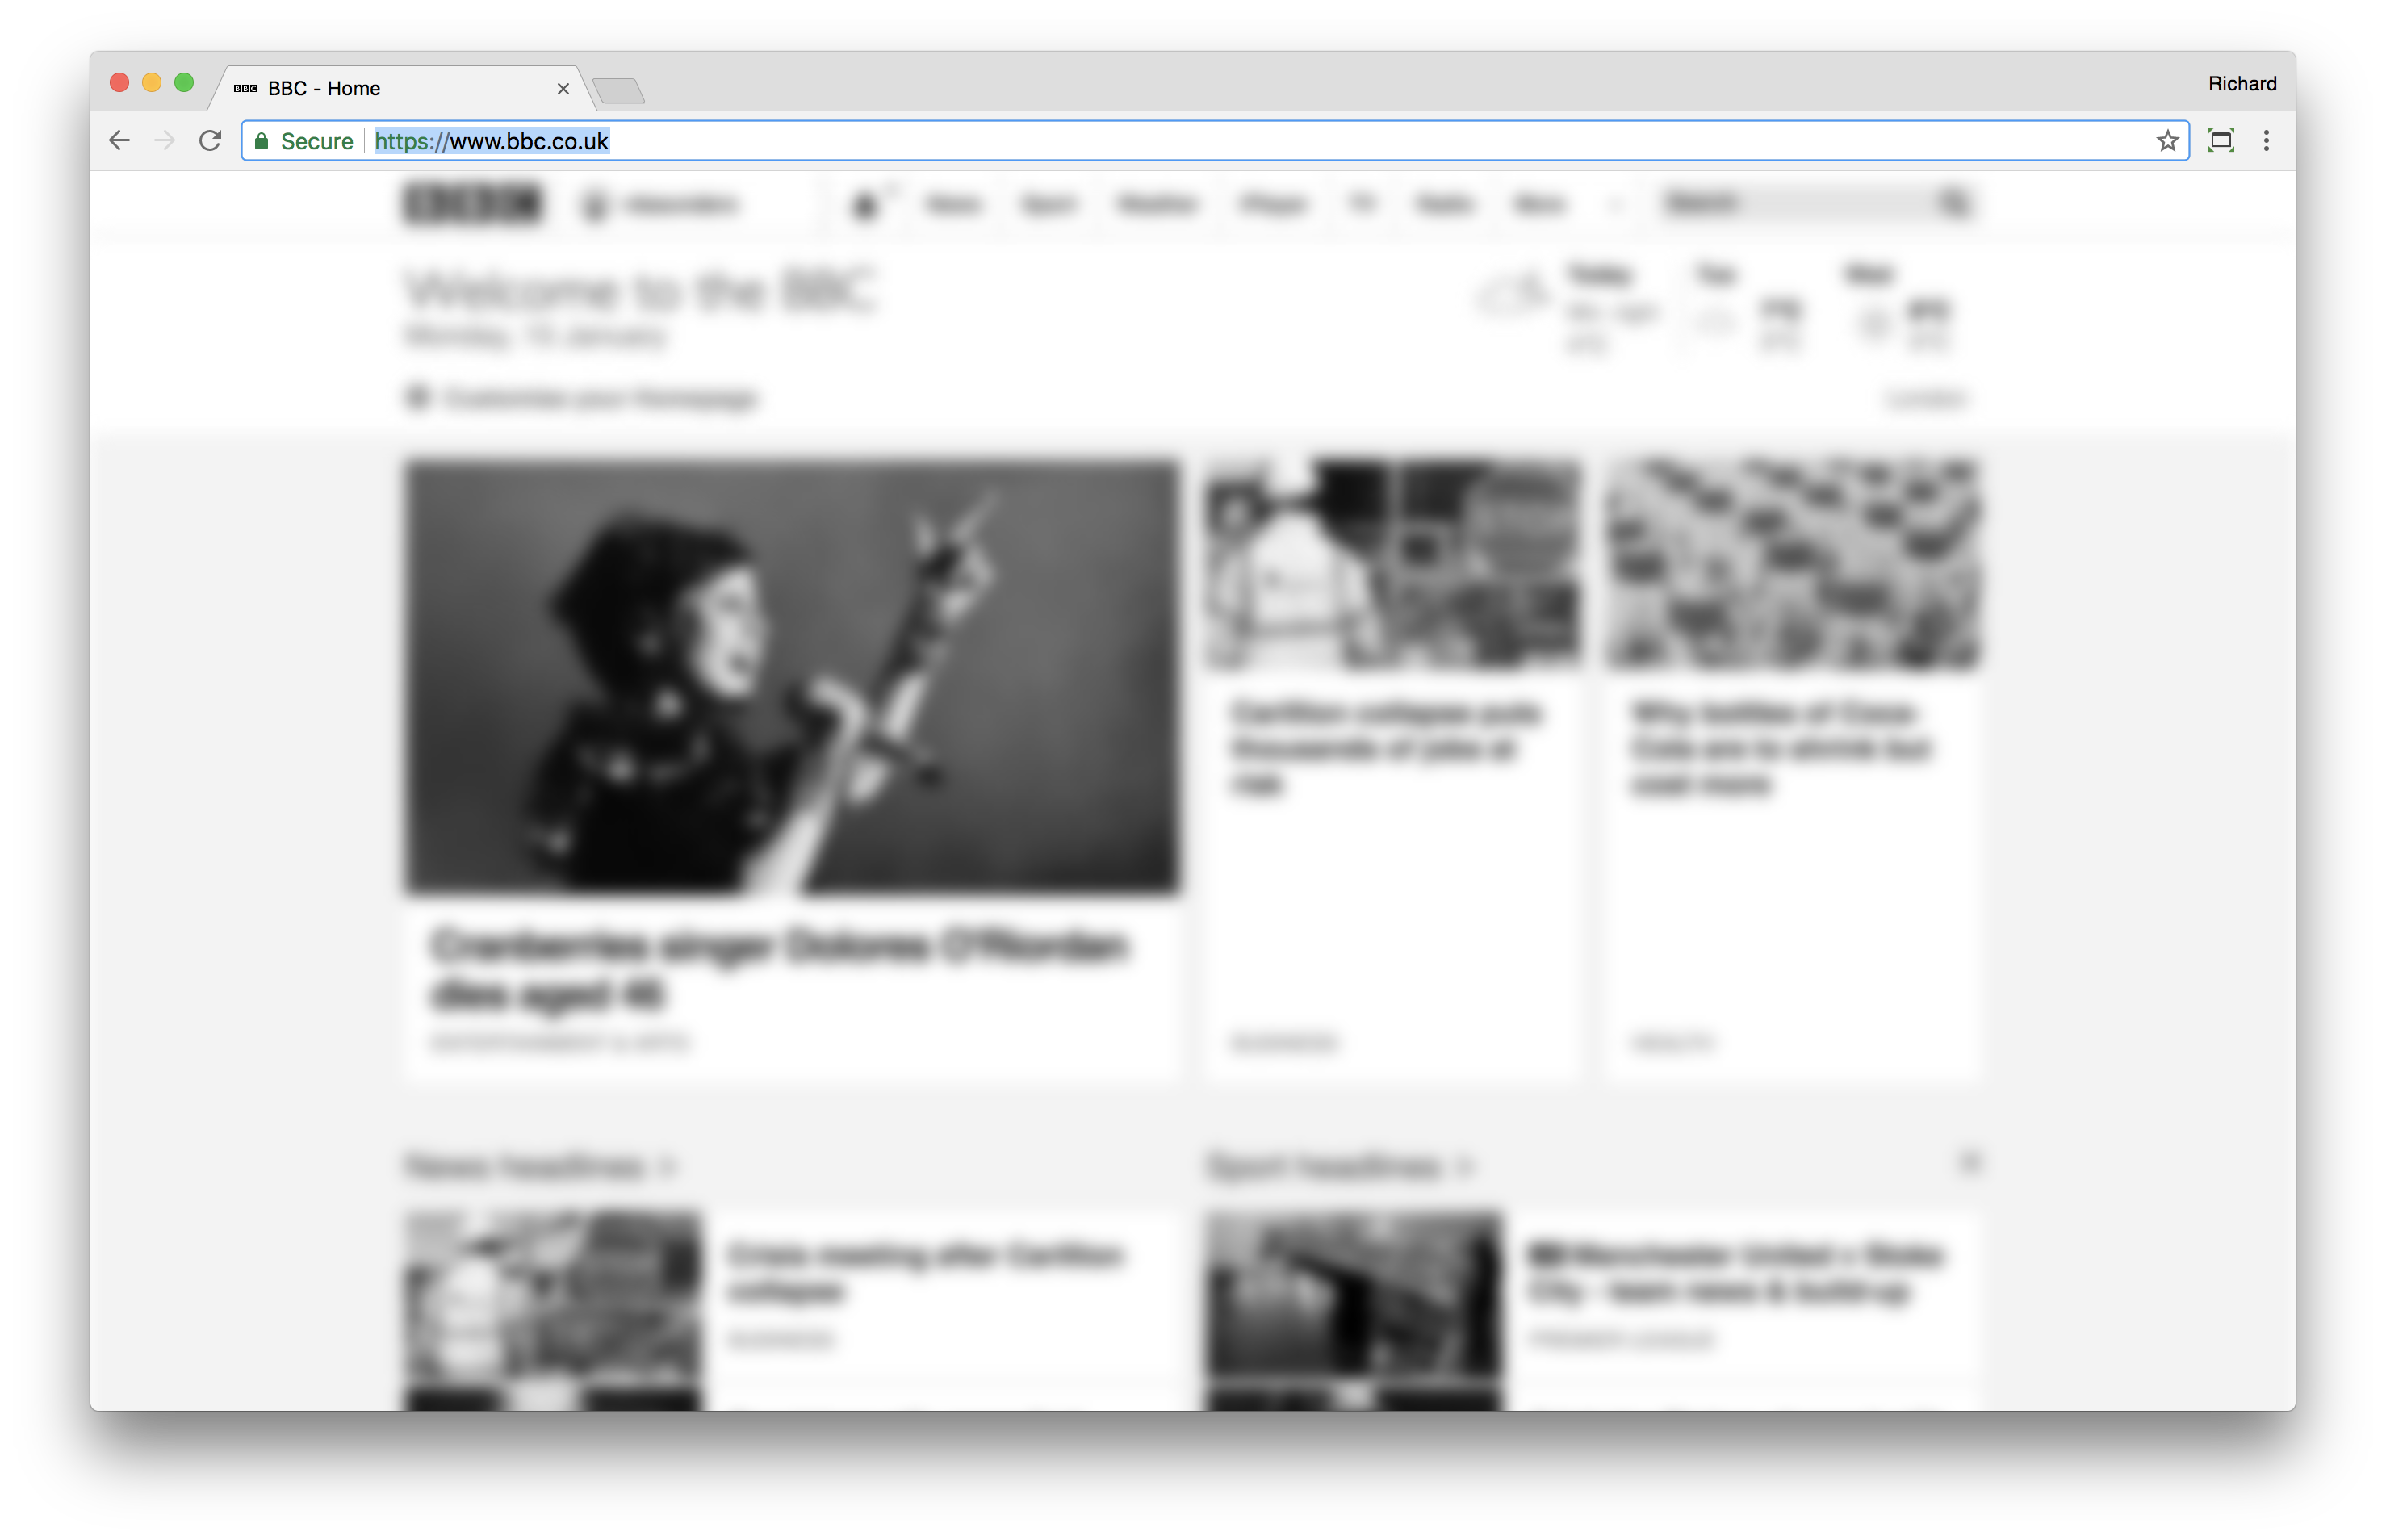 A screenshot of the bbc website converted to grayscale and a blur applied